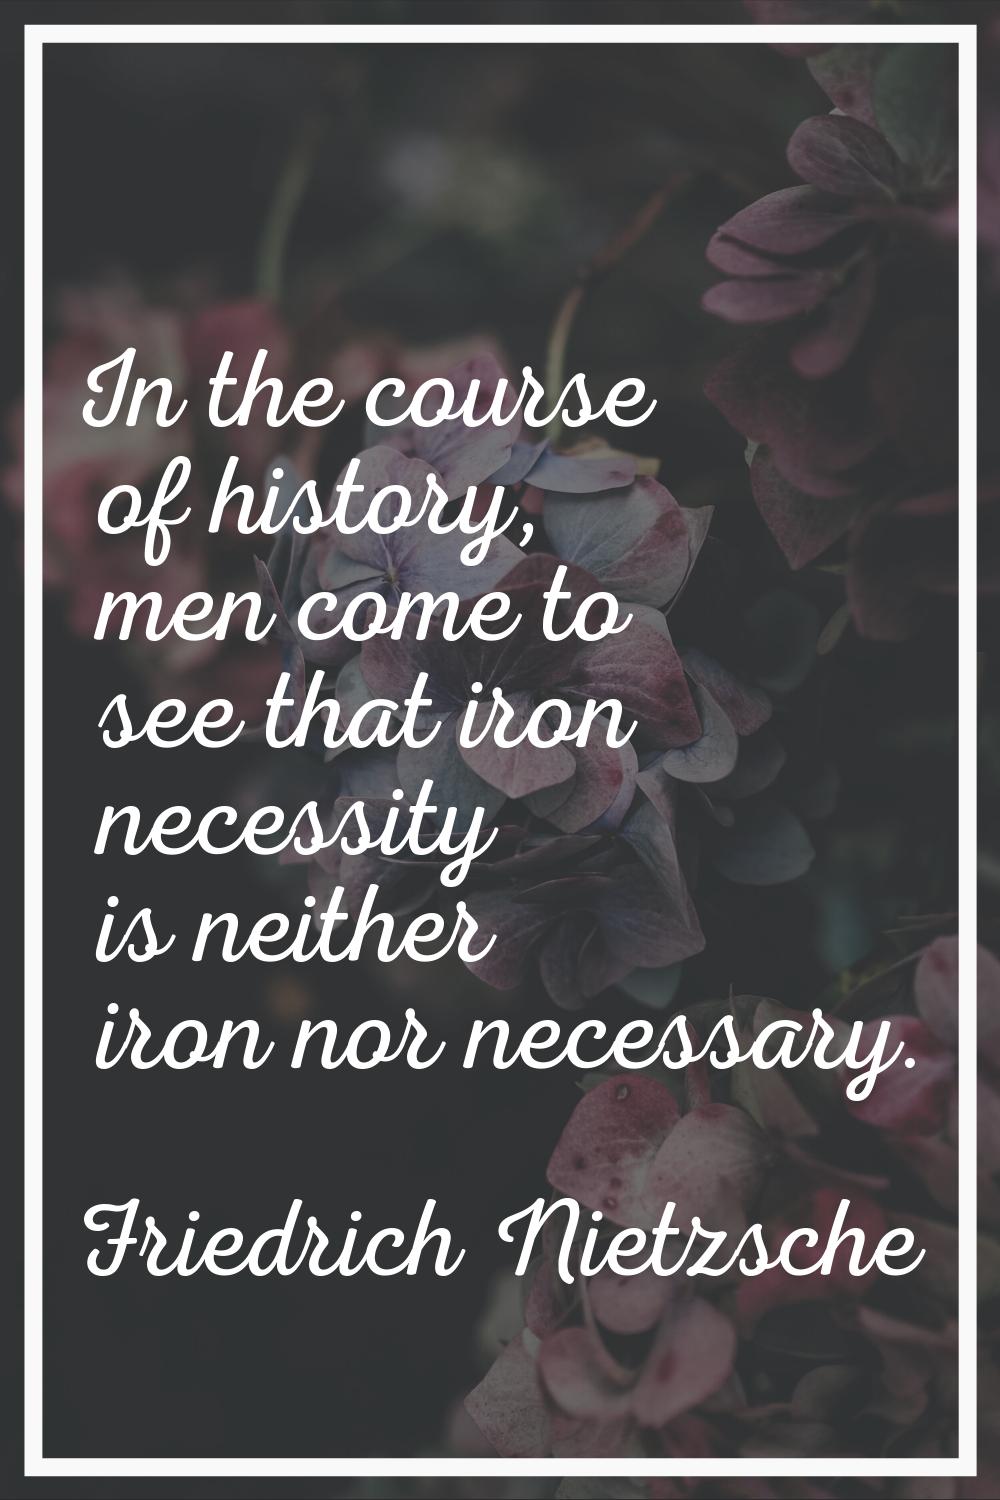 In the course of history, men come to see that iron necessity is neither iron nor necessary.